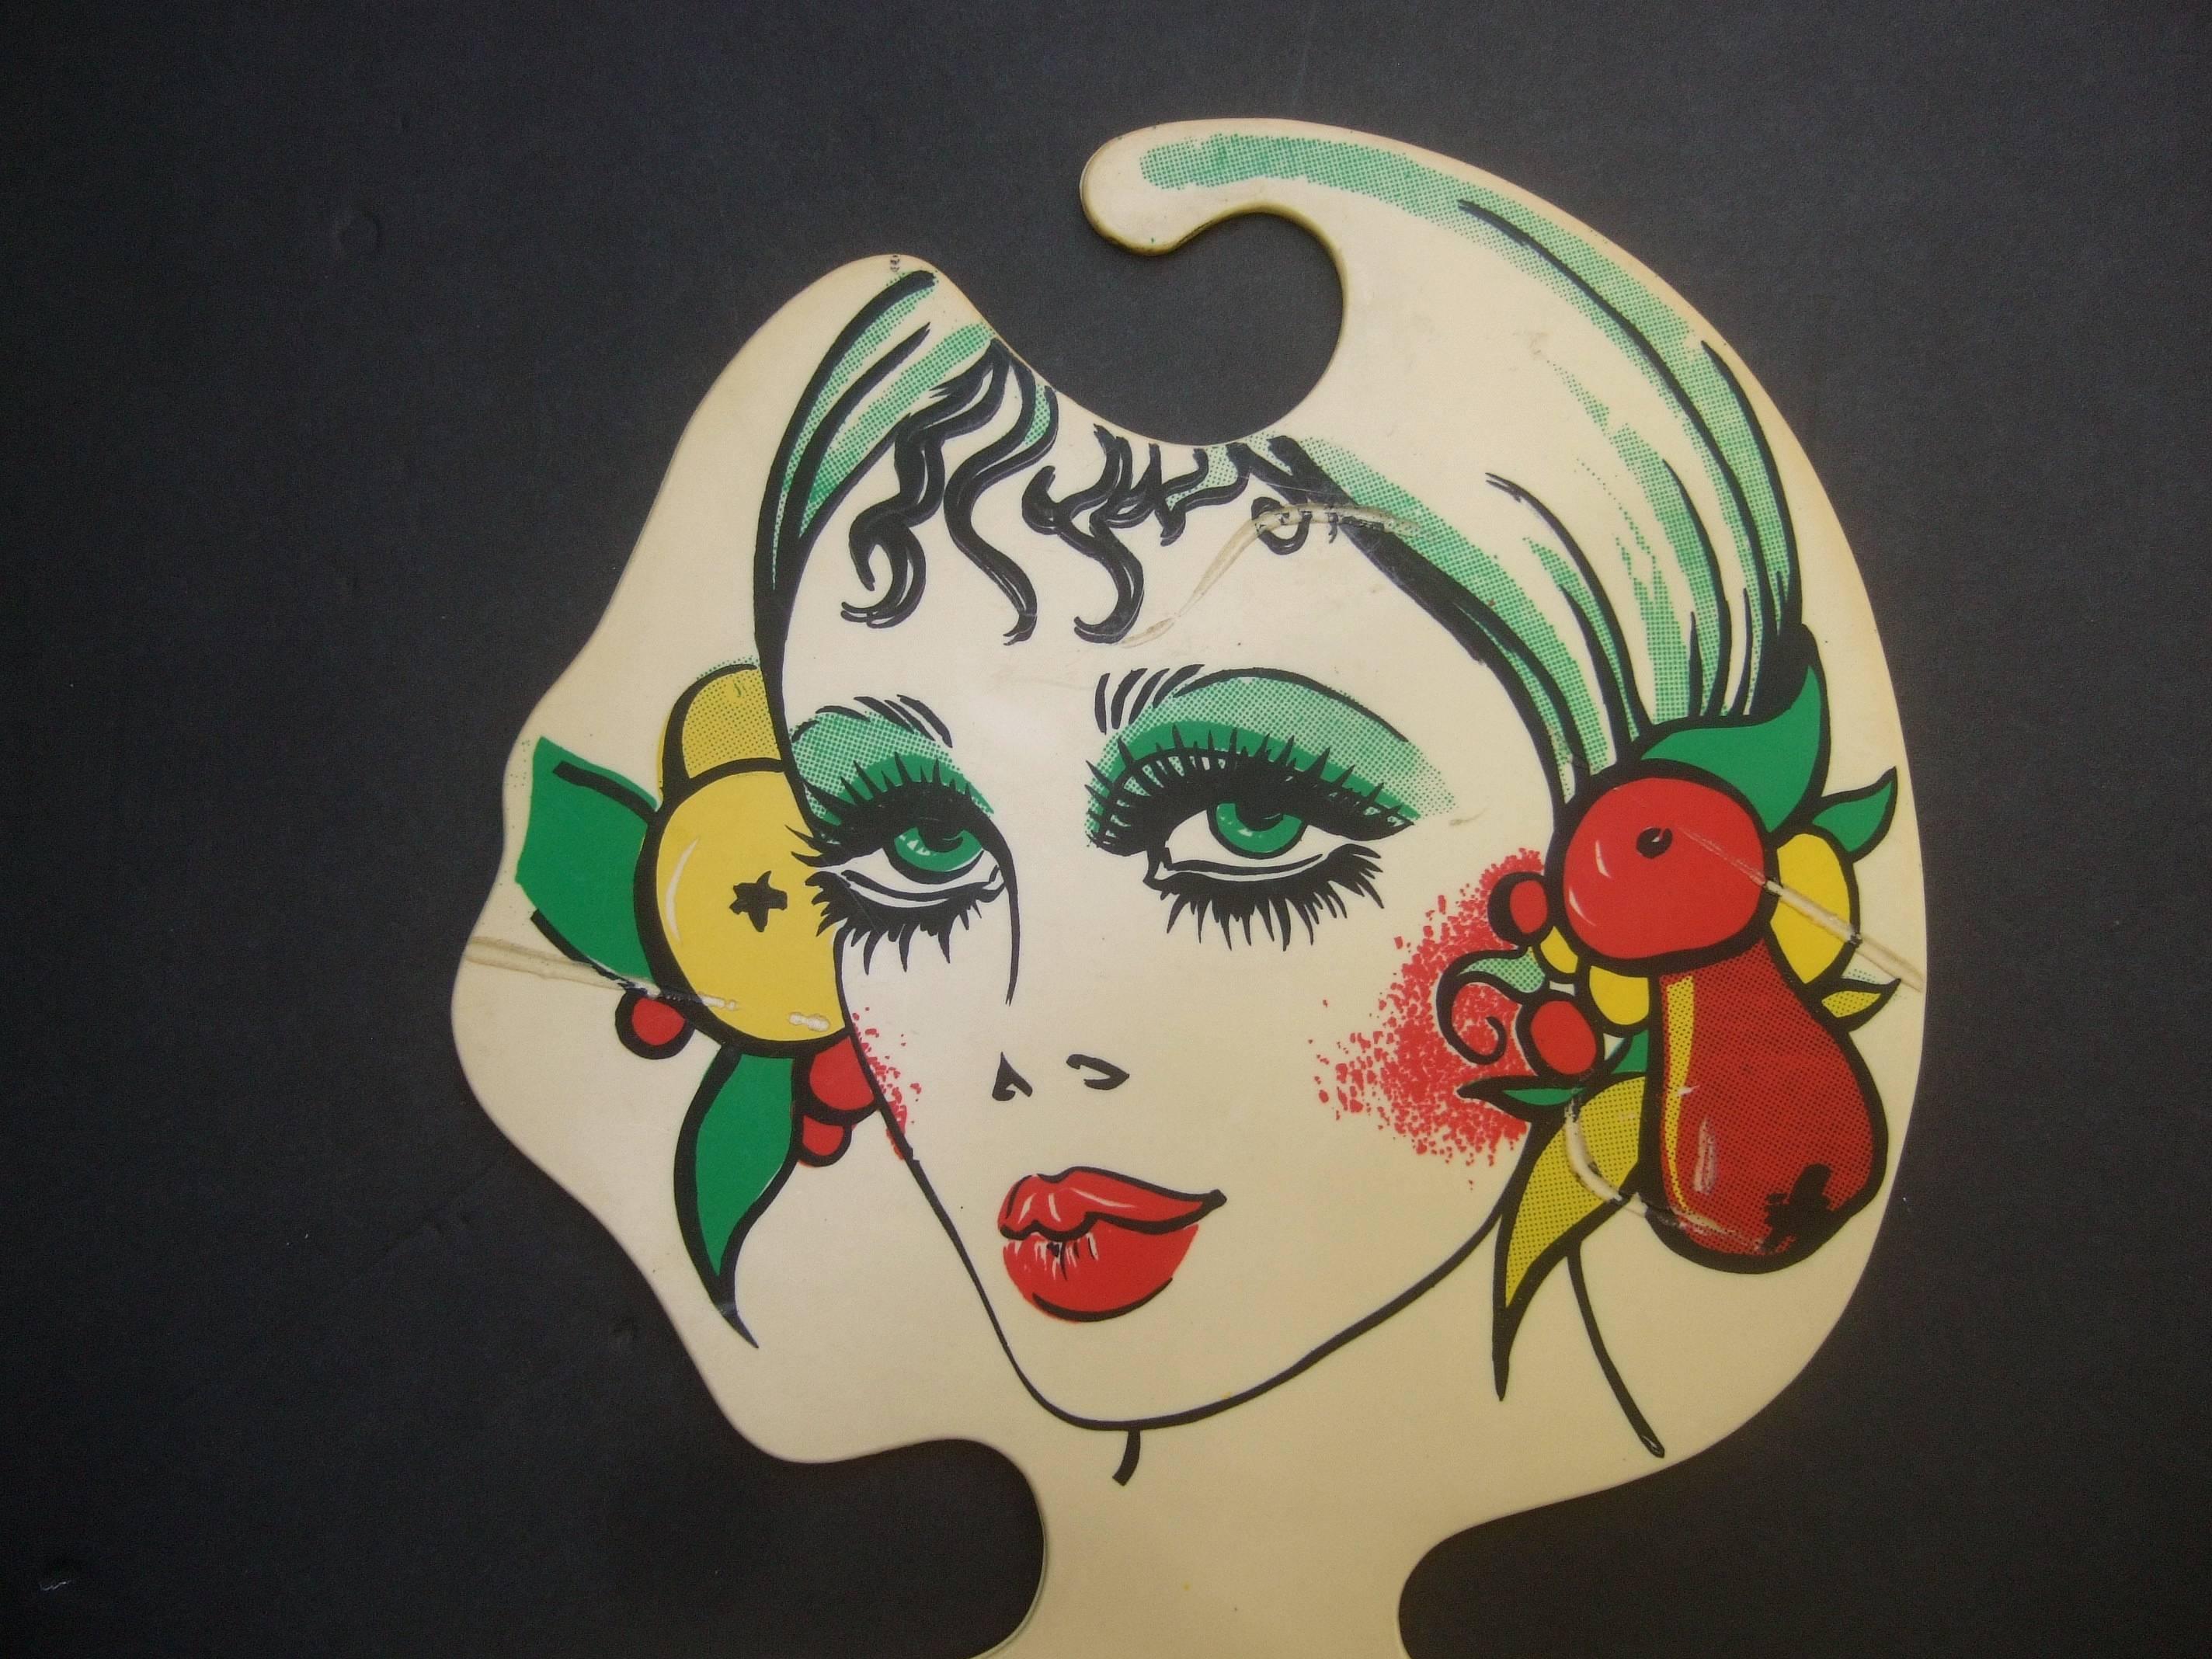 Mod Italian graphic woman plastic hanger c 1970s
The unique retro plastic hanger is illustrated 
with a stylish woman accented with lush
tropical fruits and 1970s style makeup 

Reminiscent of the 1970s Biba style models 

Designed by B D